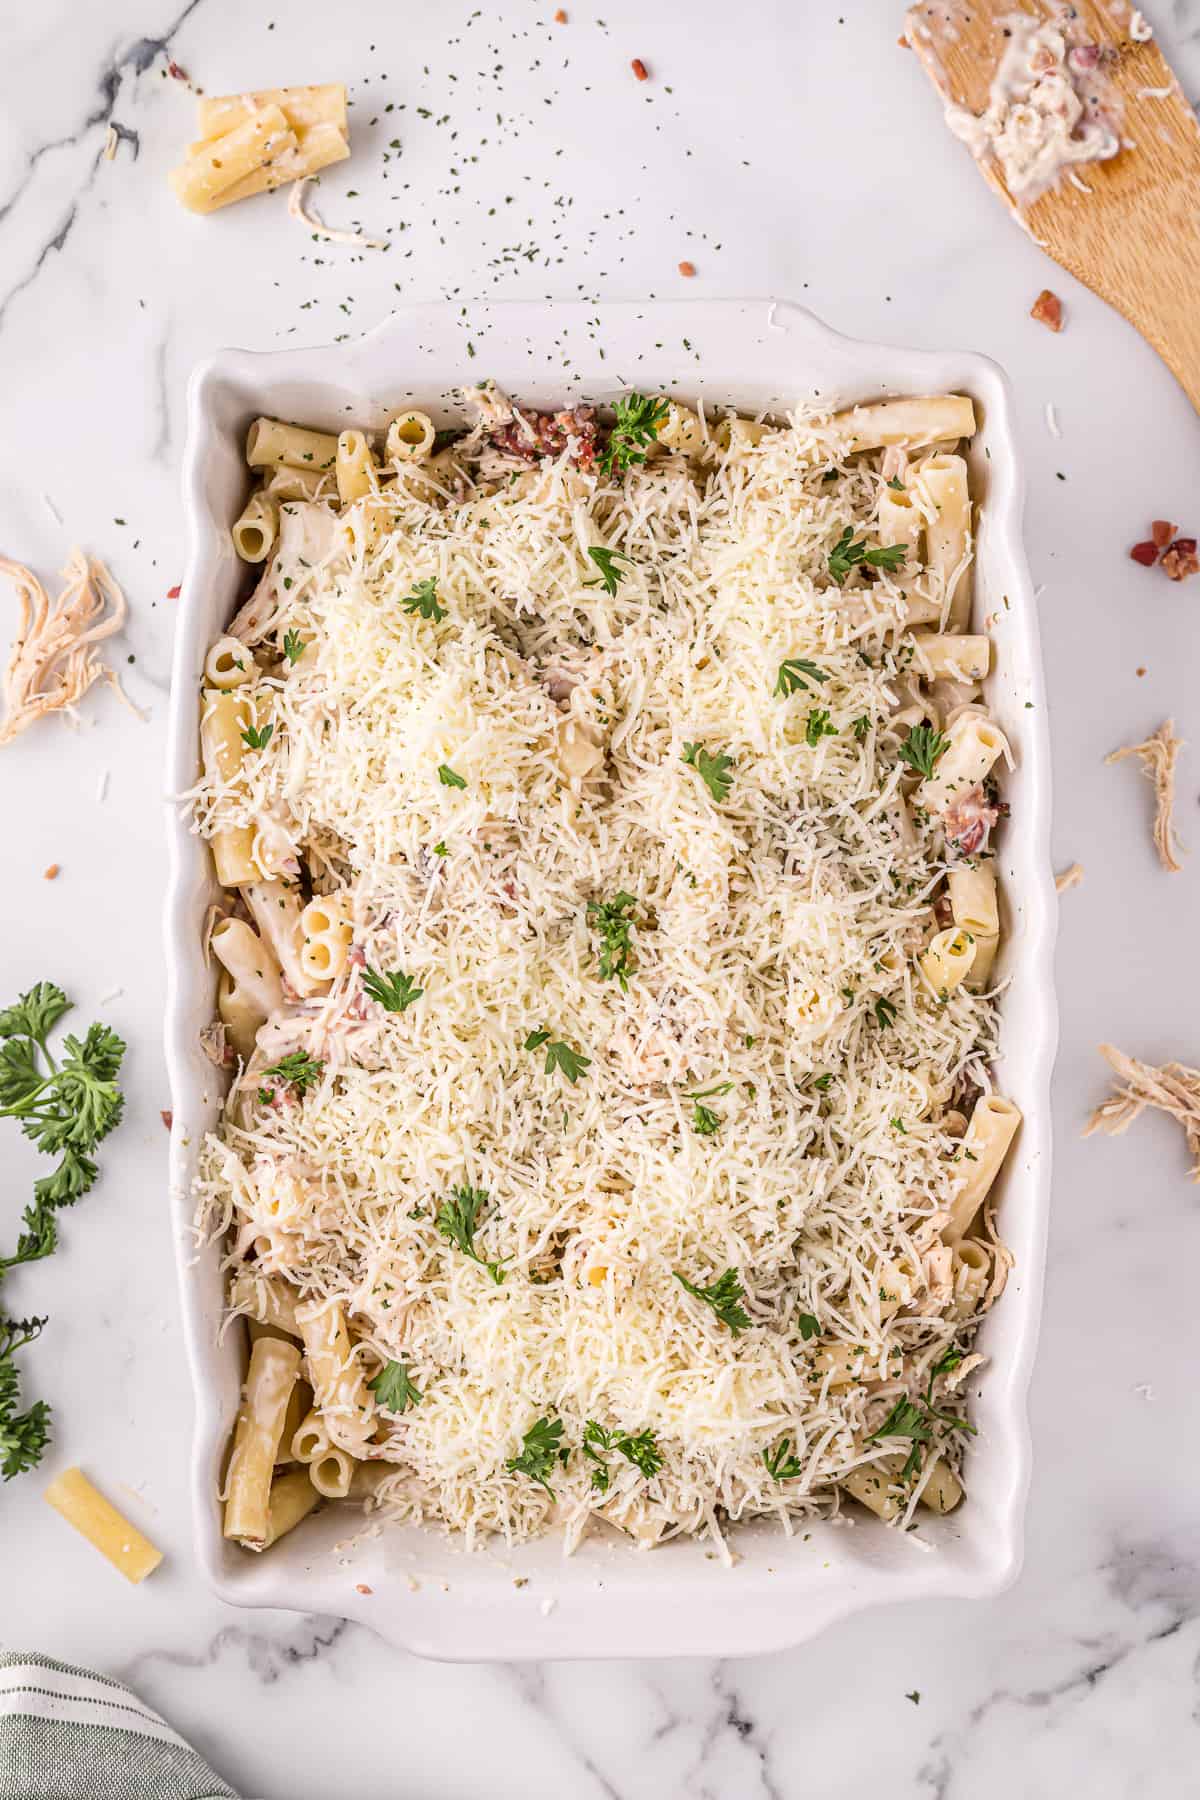 Unbaked chicken Alfredo casserole, topped with shredded cheese and parsley